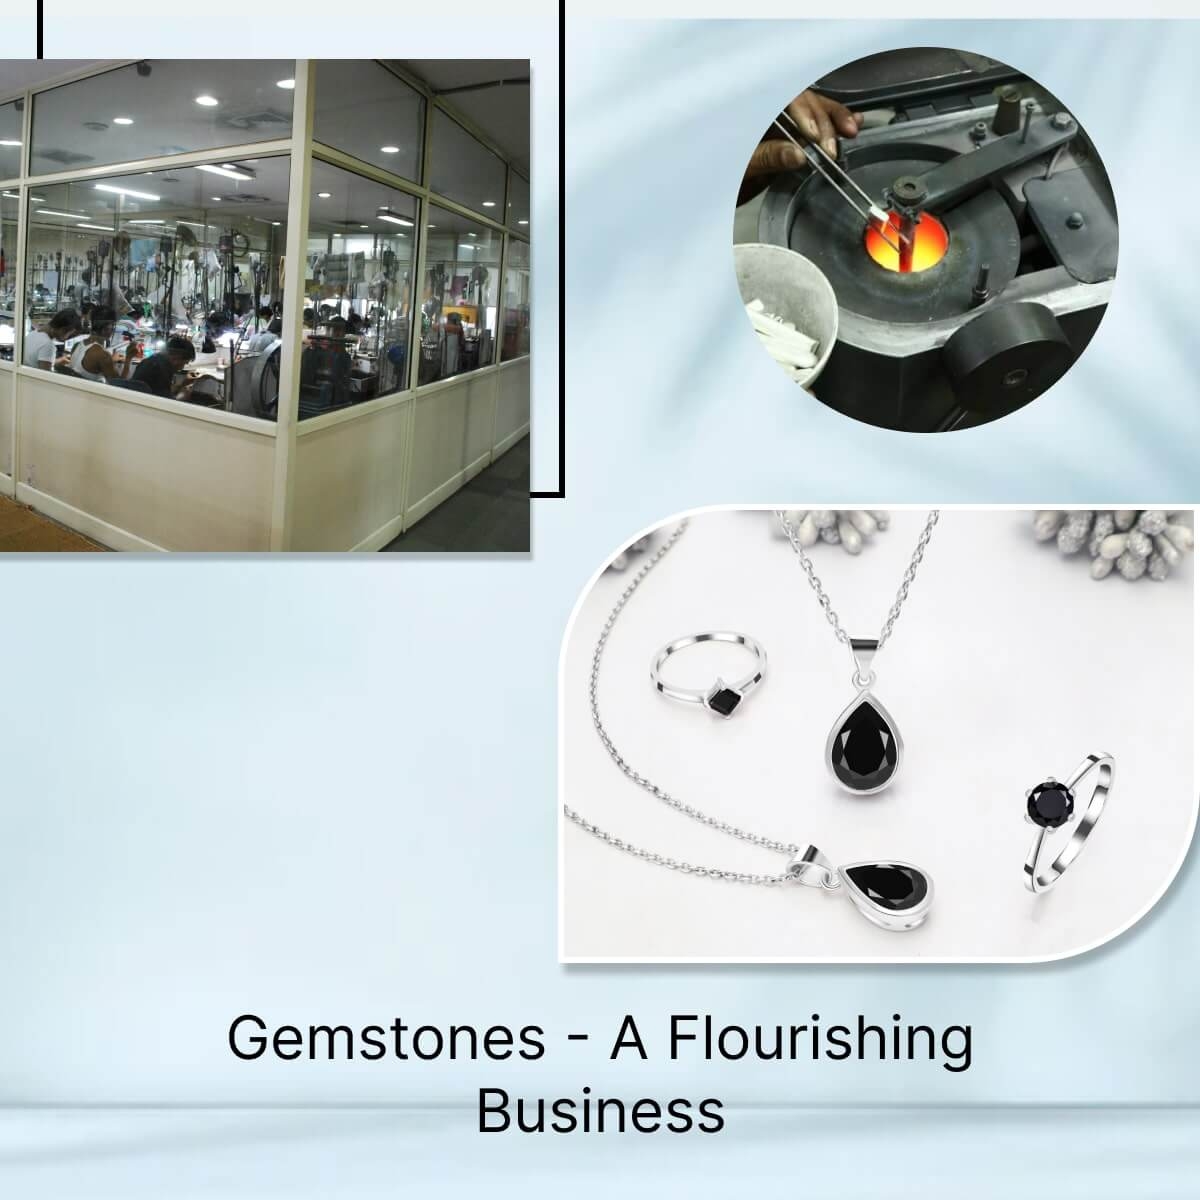 Gemstones and its growing industry